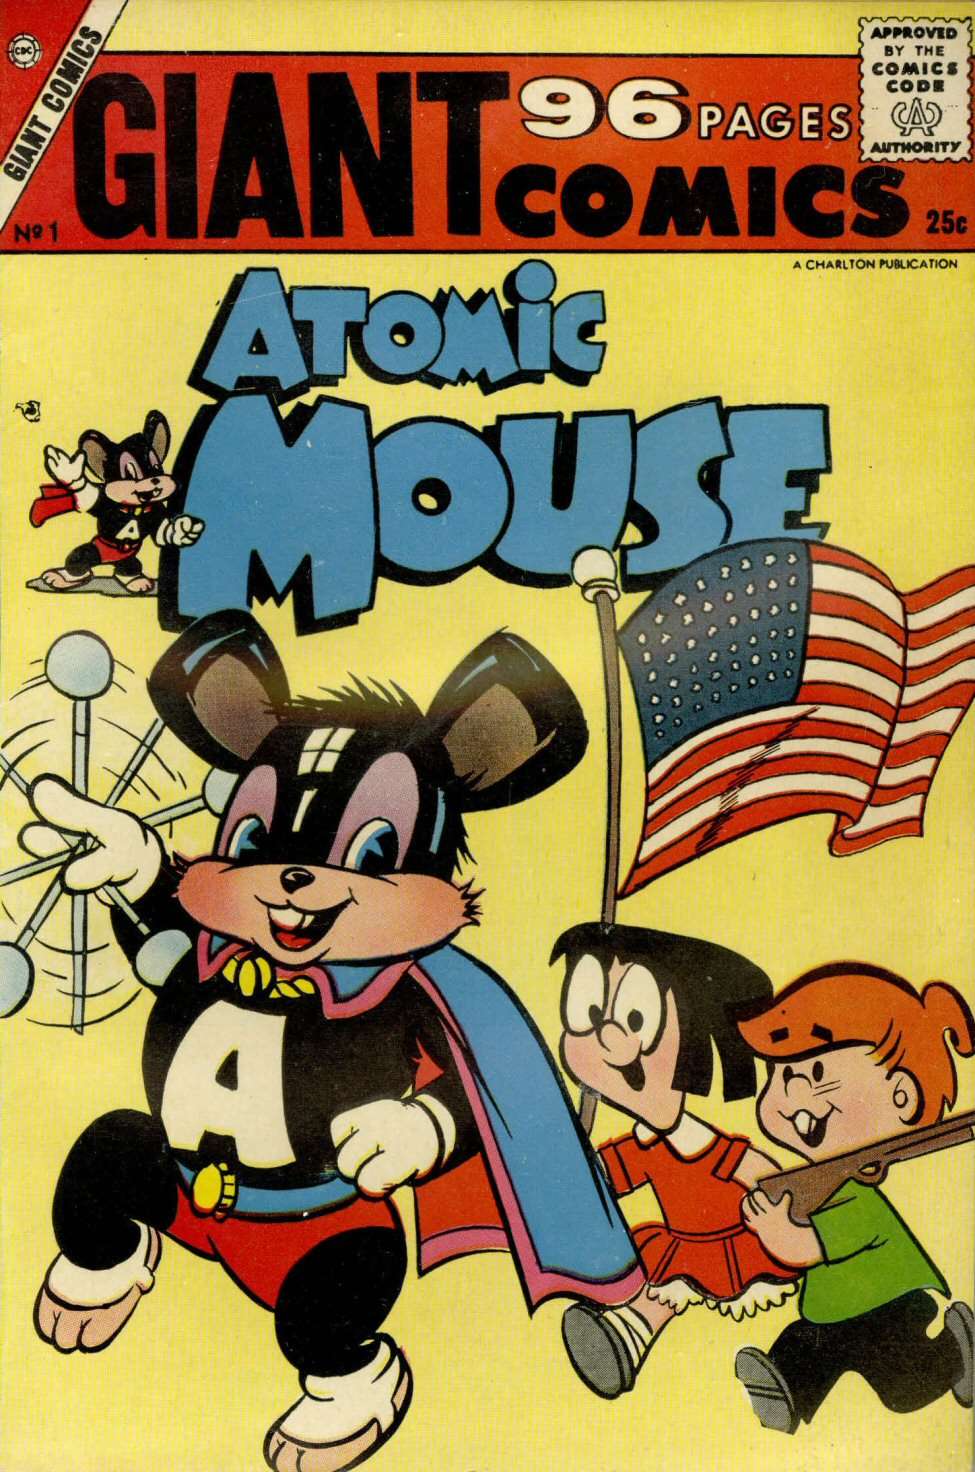 Book Cover For Giant Comics 1 - Atomic Mouse - Version 2